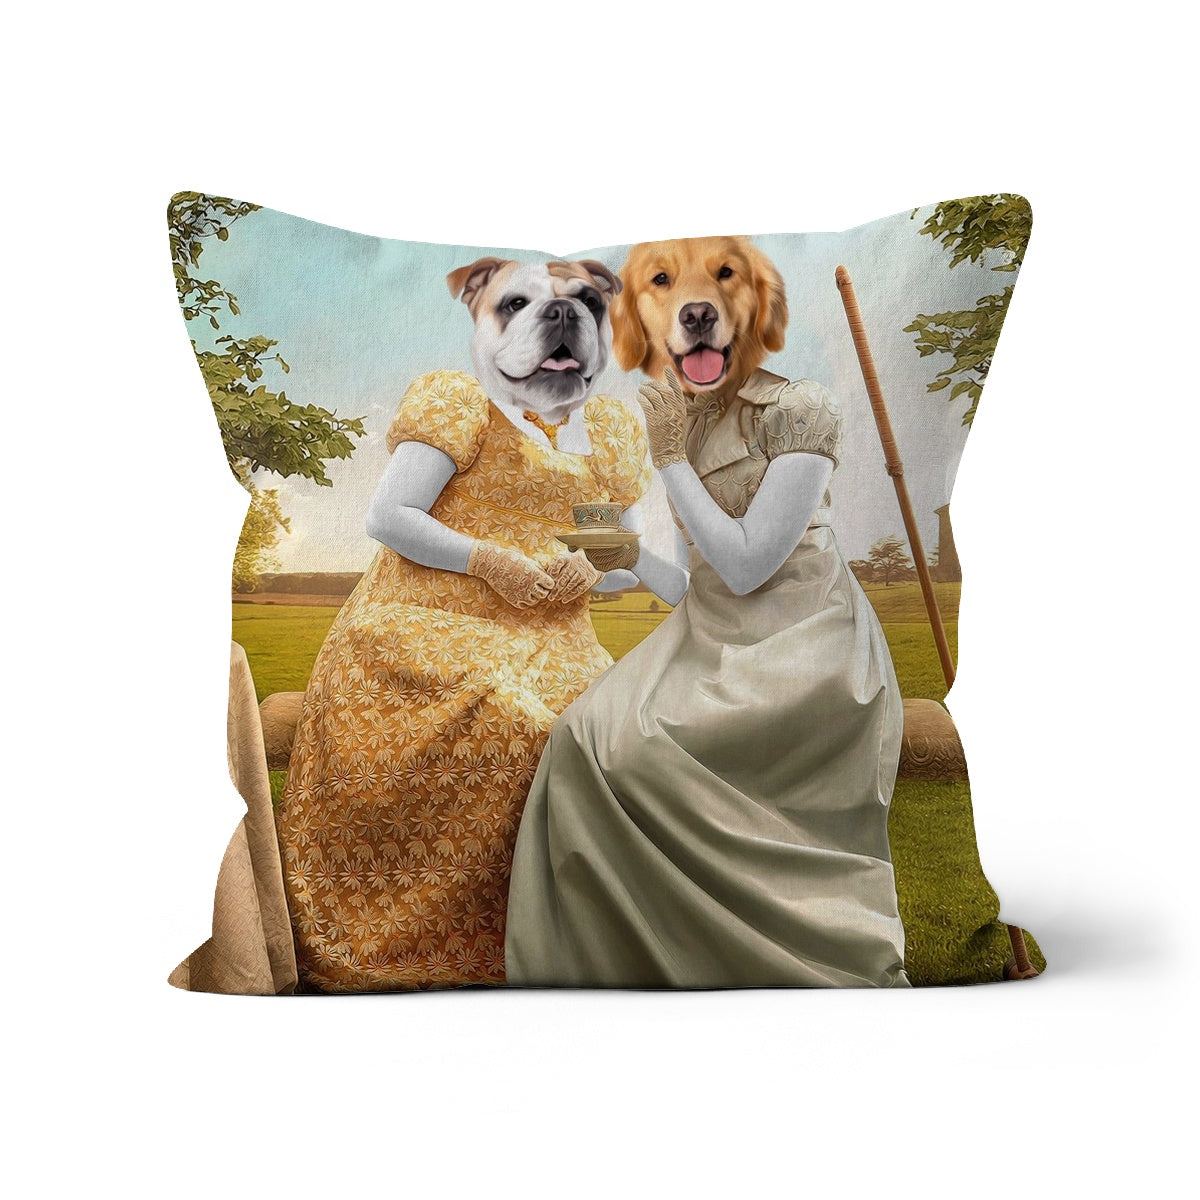 Paw & Glory, pawandglory, dog pillow custom, pillow that looks like your dog, pet picture on pillow, pillow custom, throw pillow personalized, create your own pillow, Pet Portrait cushion,